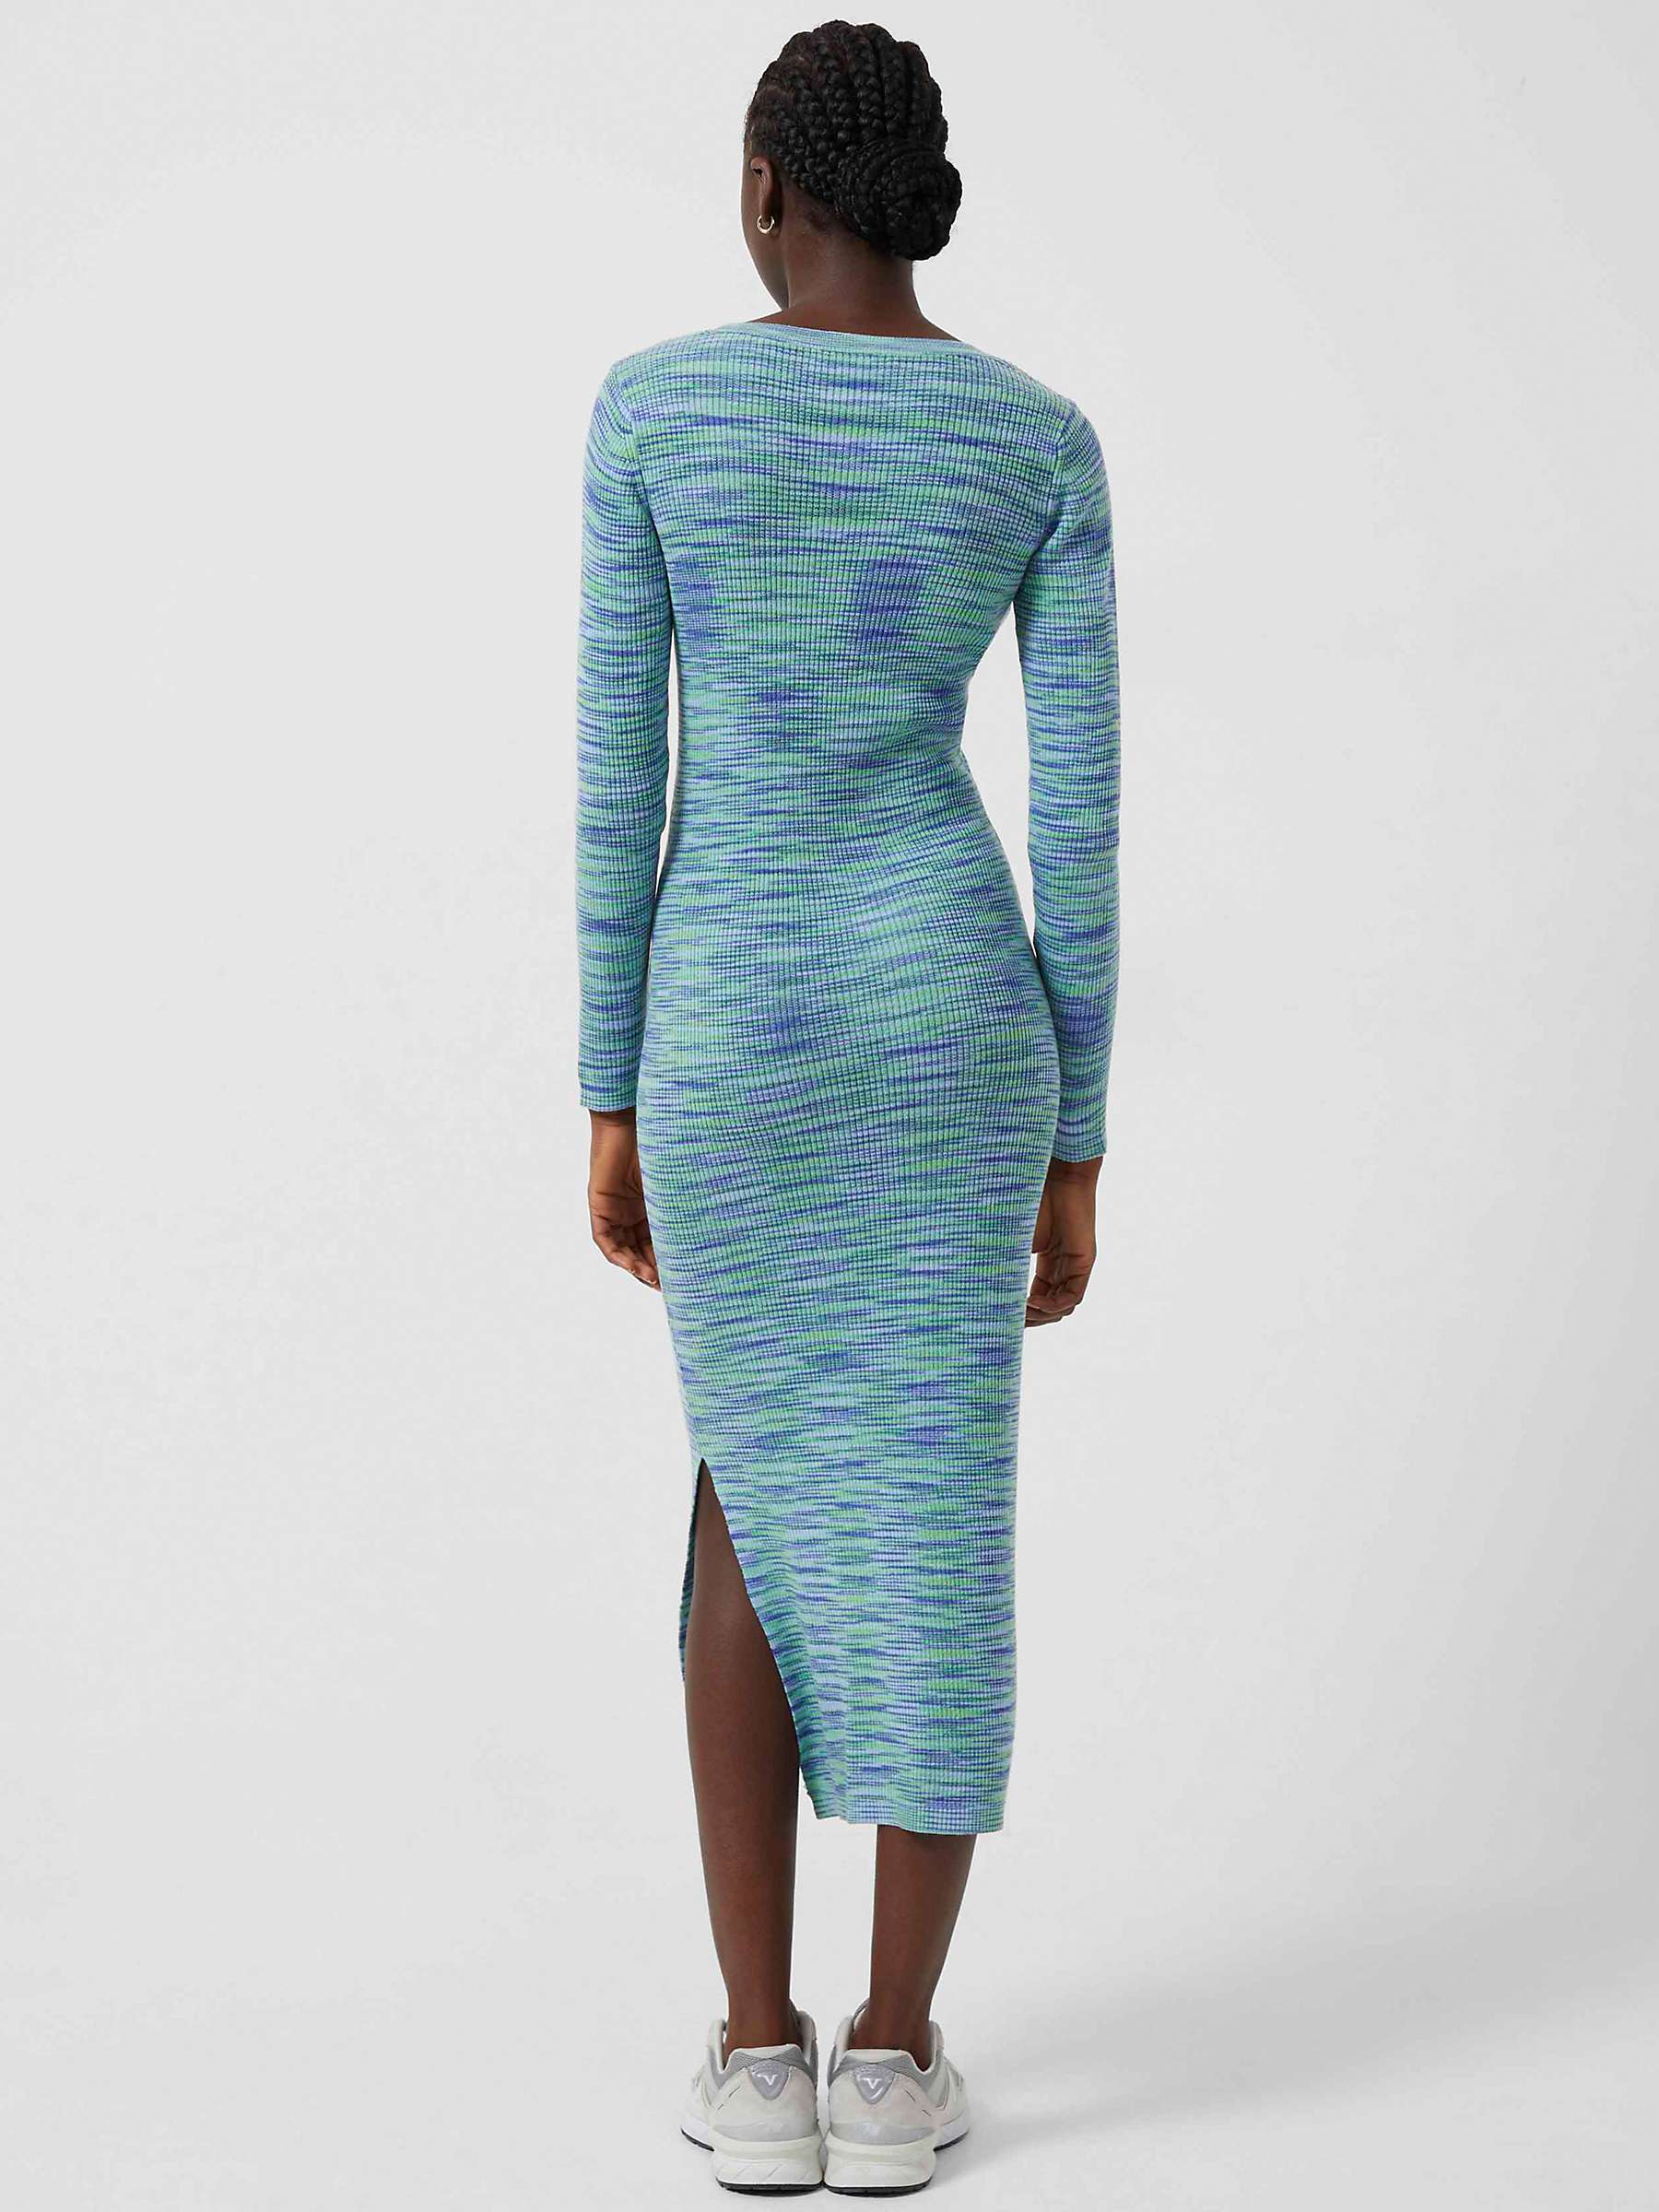 Buy French Connection Janna Space Dye Midi Dress Online at johnlewis.com